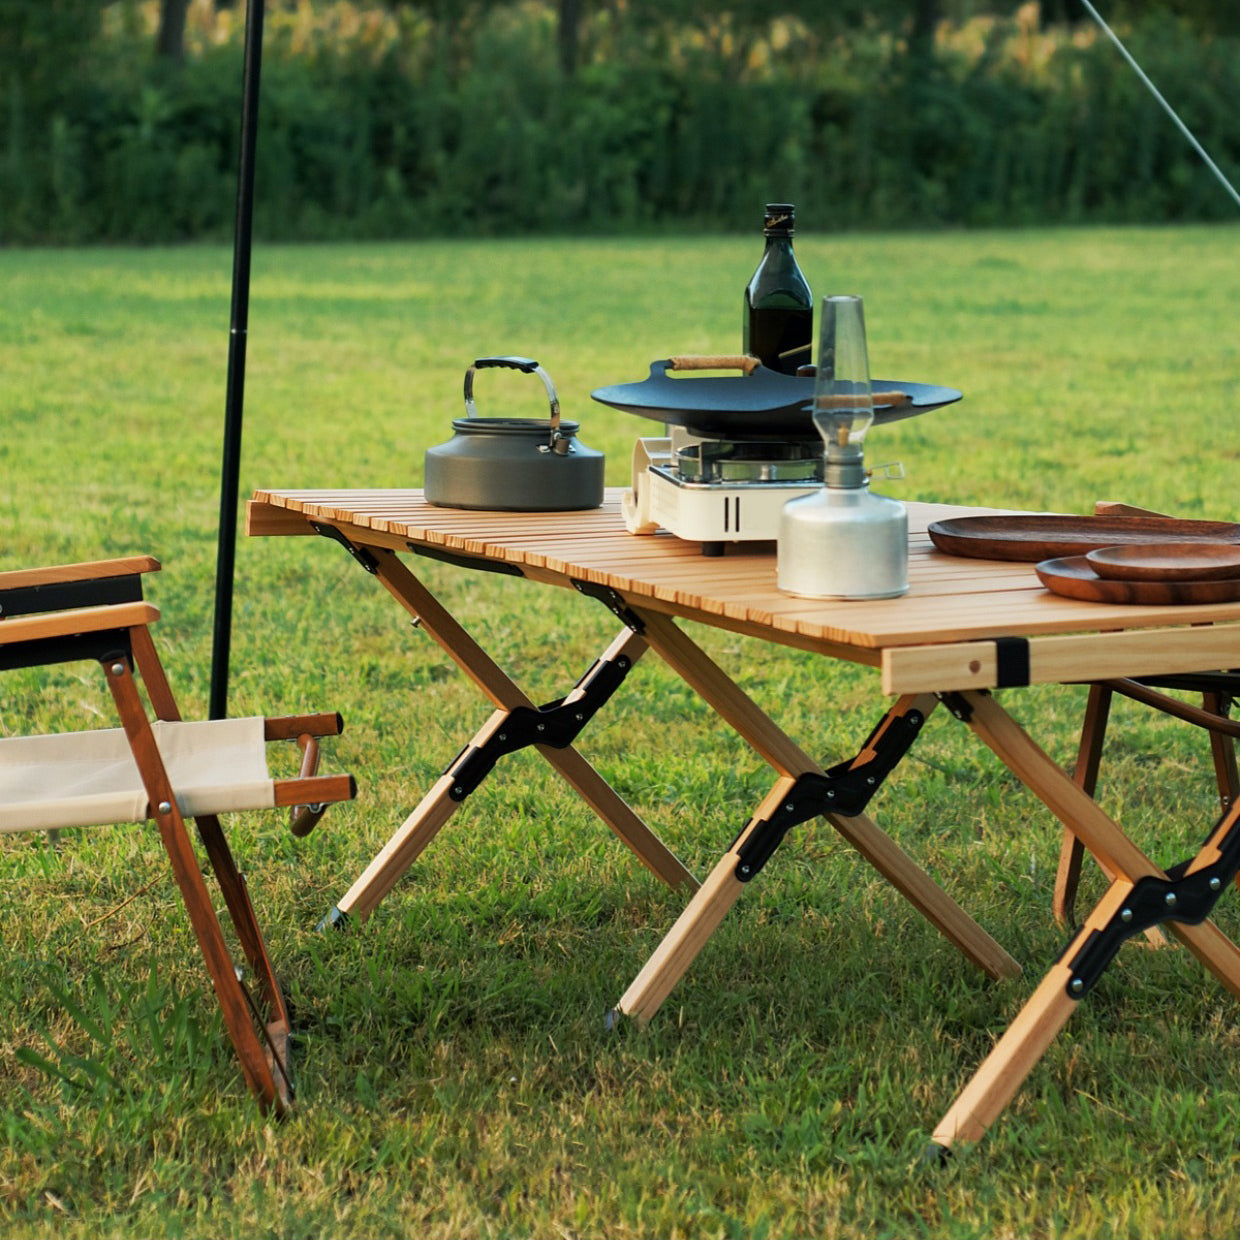 Industrial Pine Solid Wood Camping Table Rectangle Removable Camping Table